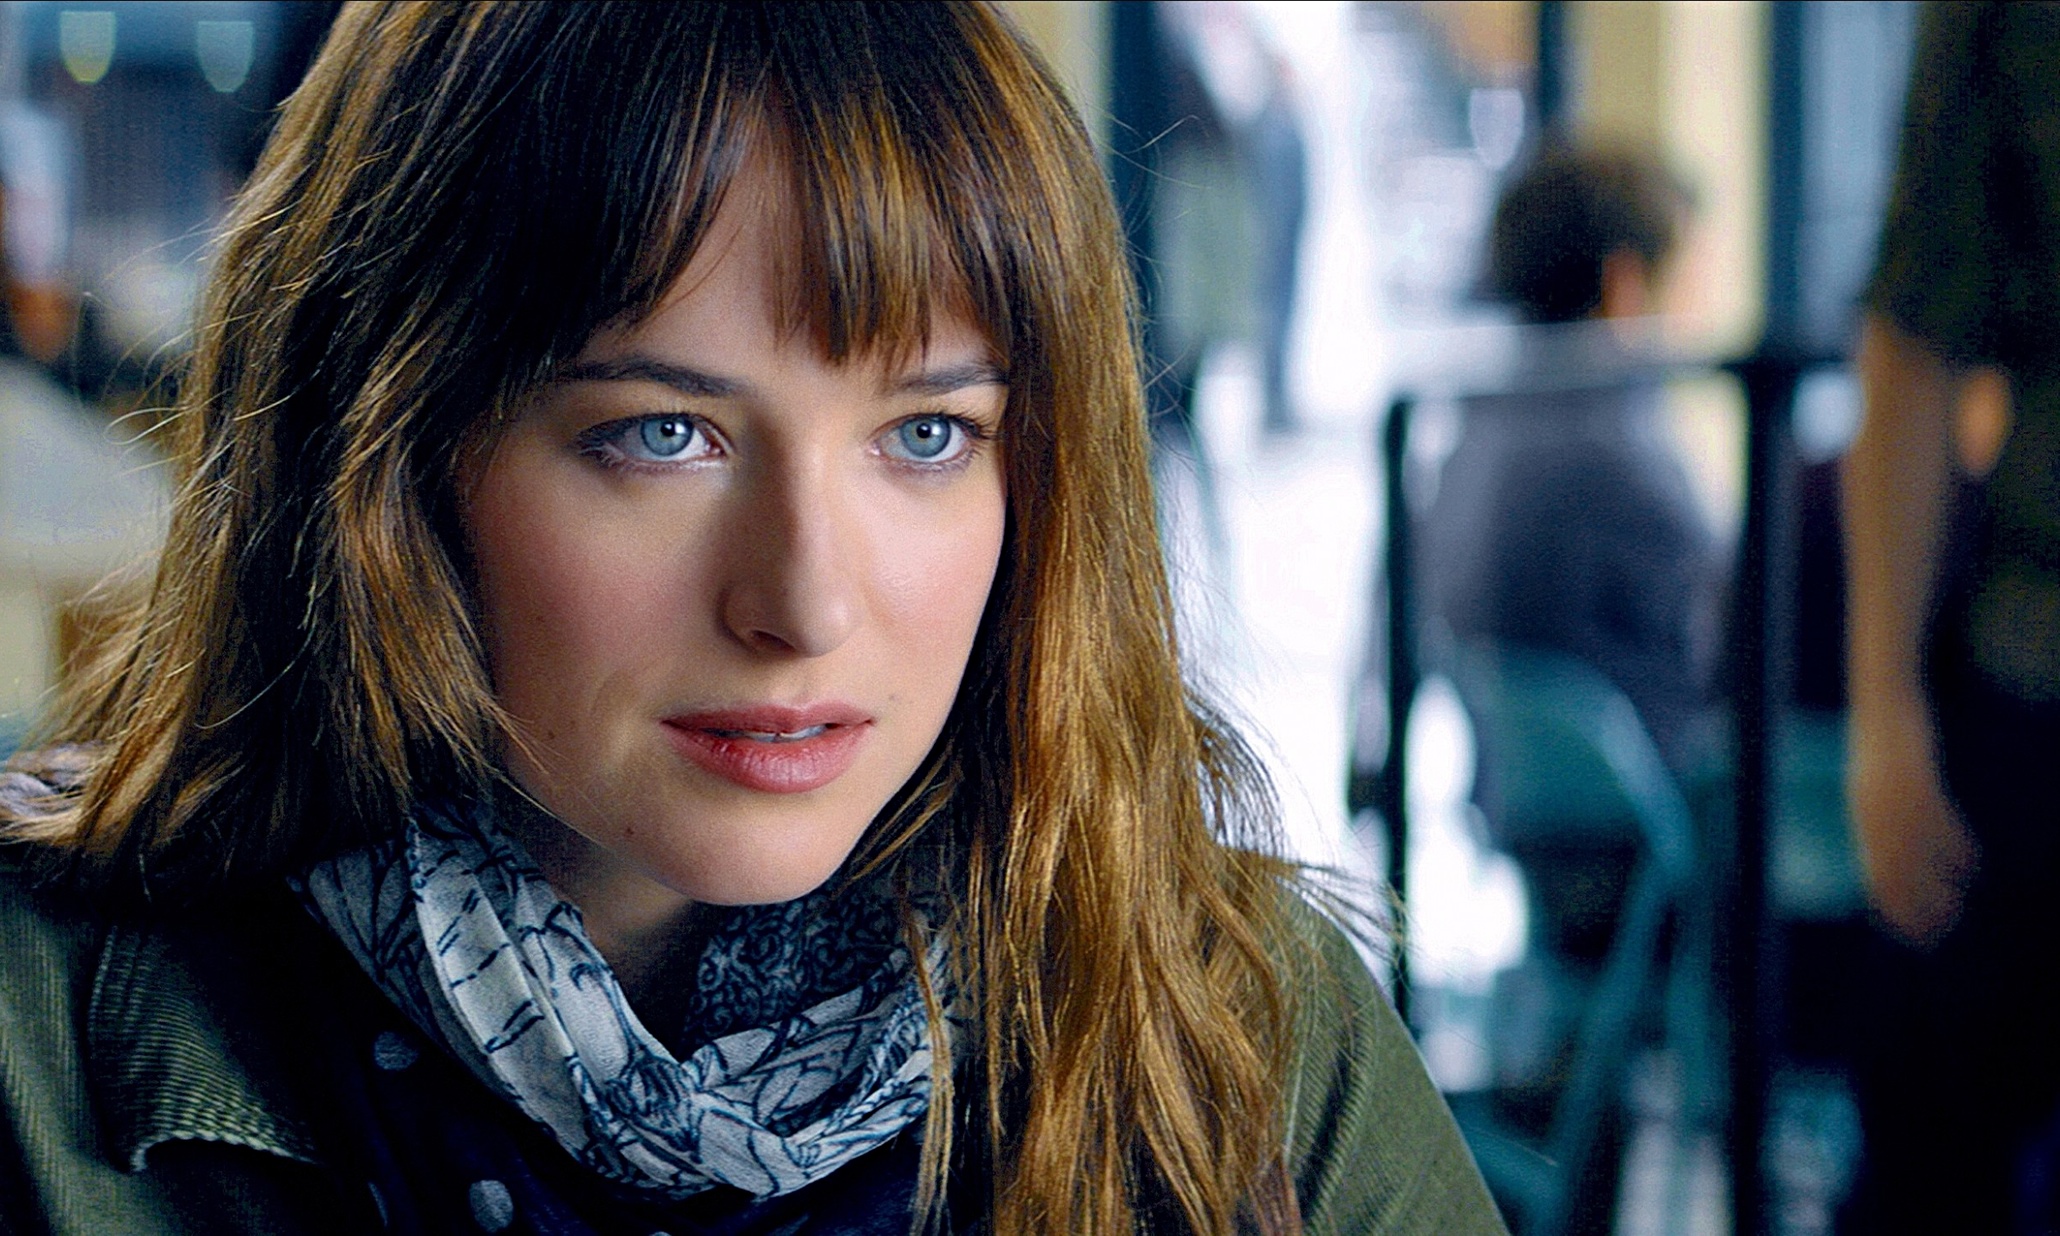 Fifty Shades Of Grey Fades Fast But Still Rules The Global Box